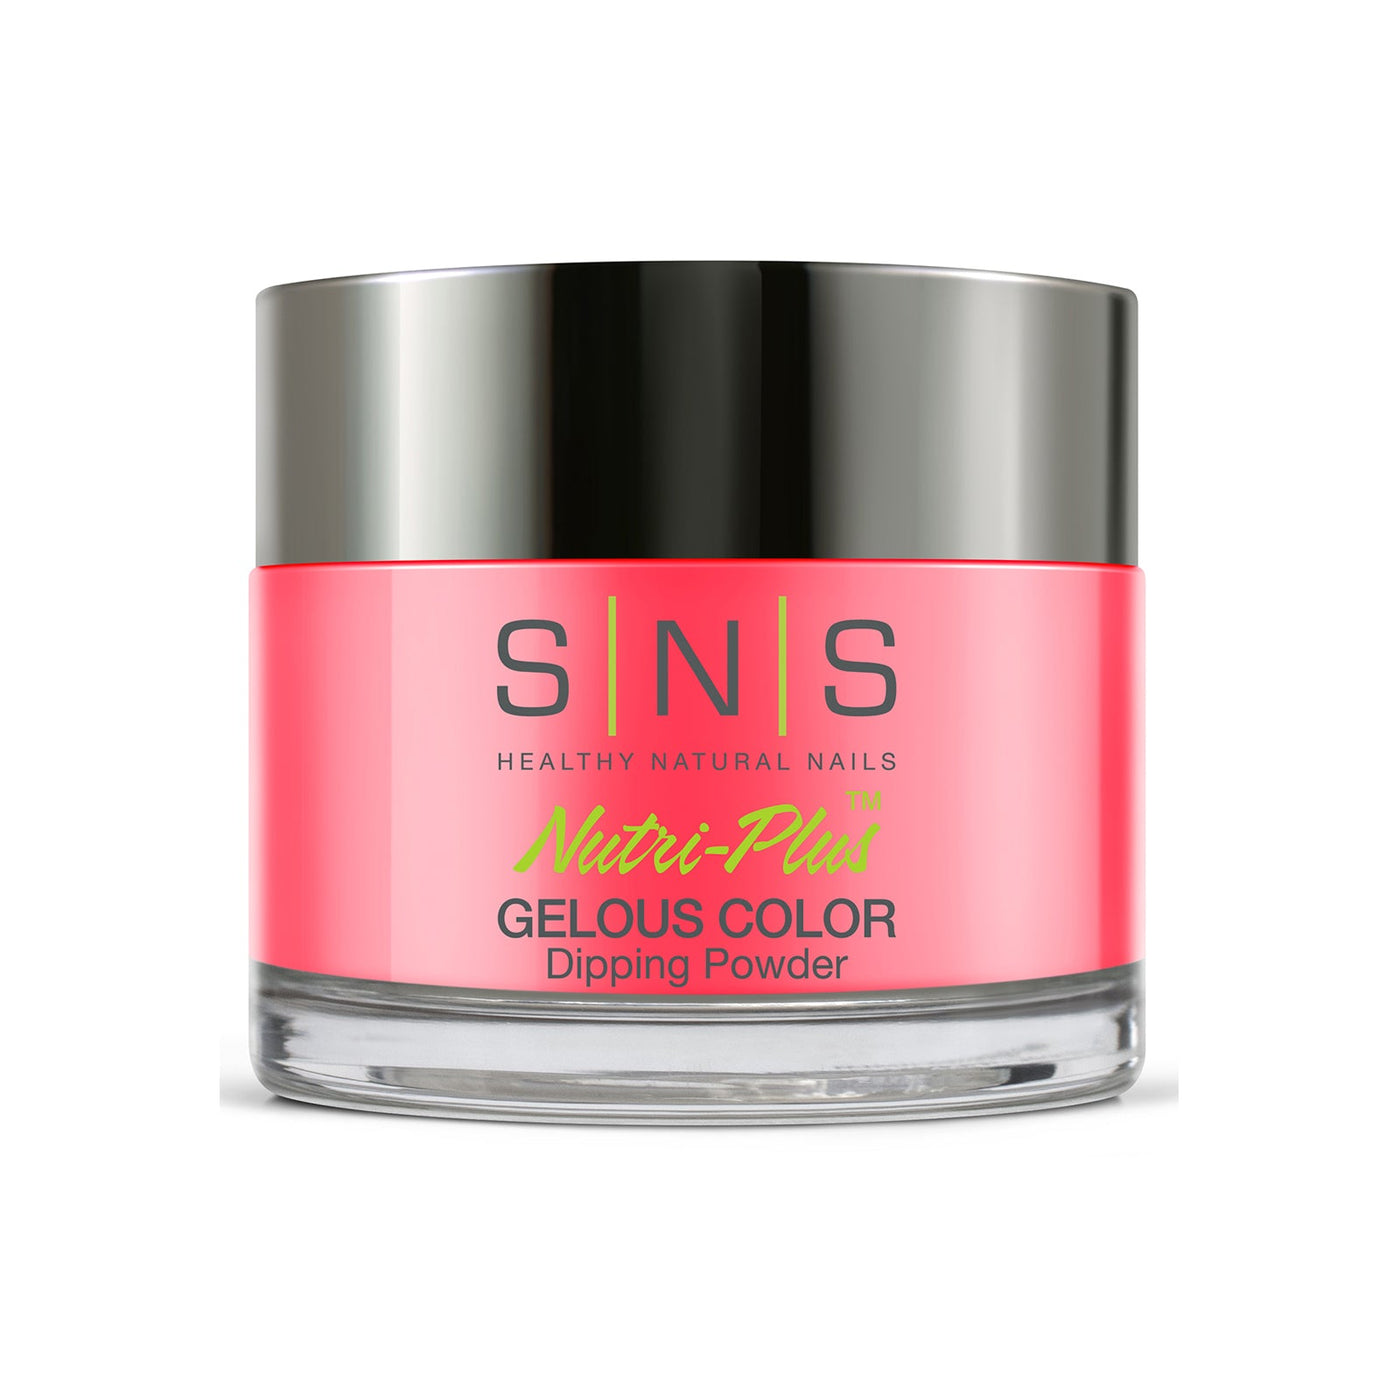 SNS Gelous Color Dipping Powder DW24 Nantucket Sound (43g) packaging